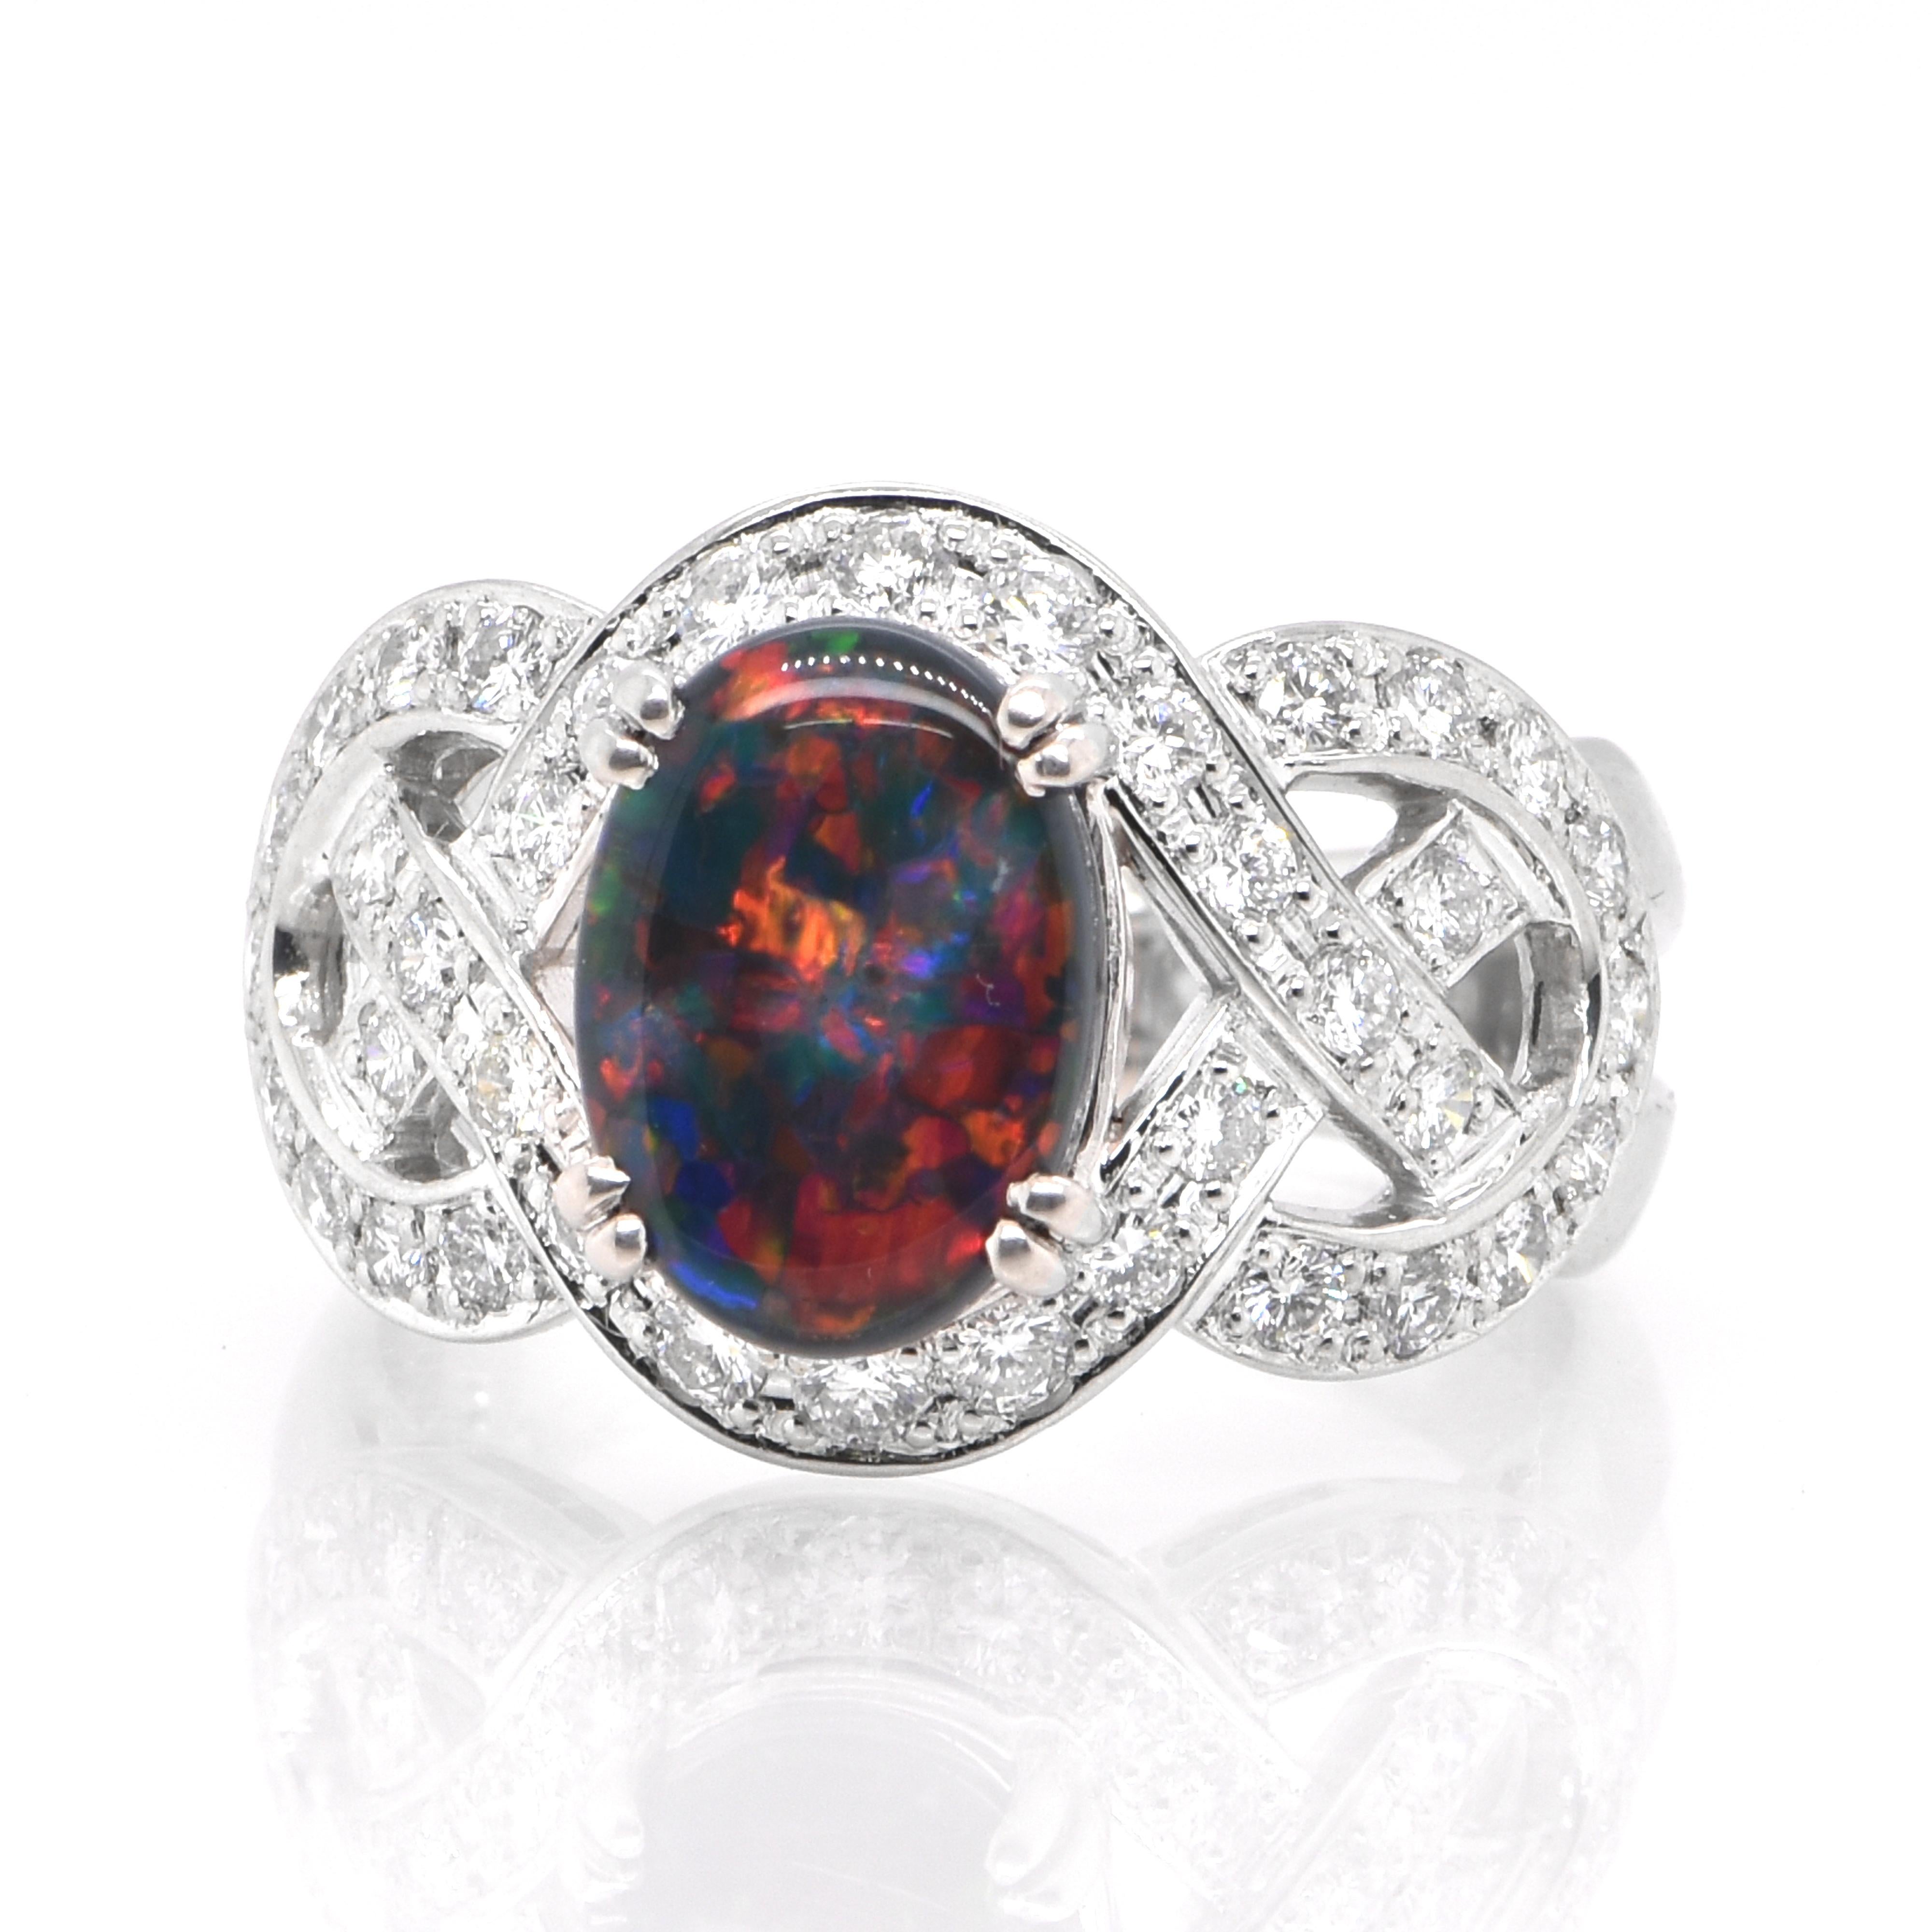 A beautiful ring featuring a 2.00 Carat, Natural, Australian (Lighting Ridge) Black Opal and 0.67 Carats of Diamond Accents set in Platinum. The Opal displays very good play of color! Opals are known for exhibiting flashes of rainbow colors known as